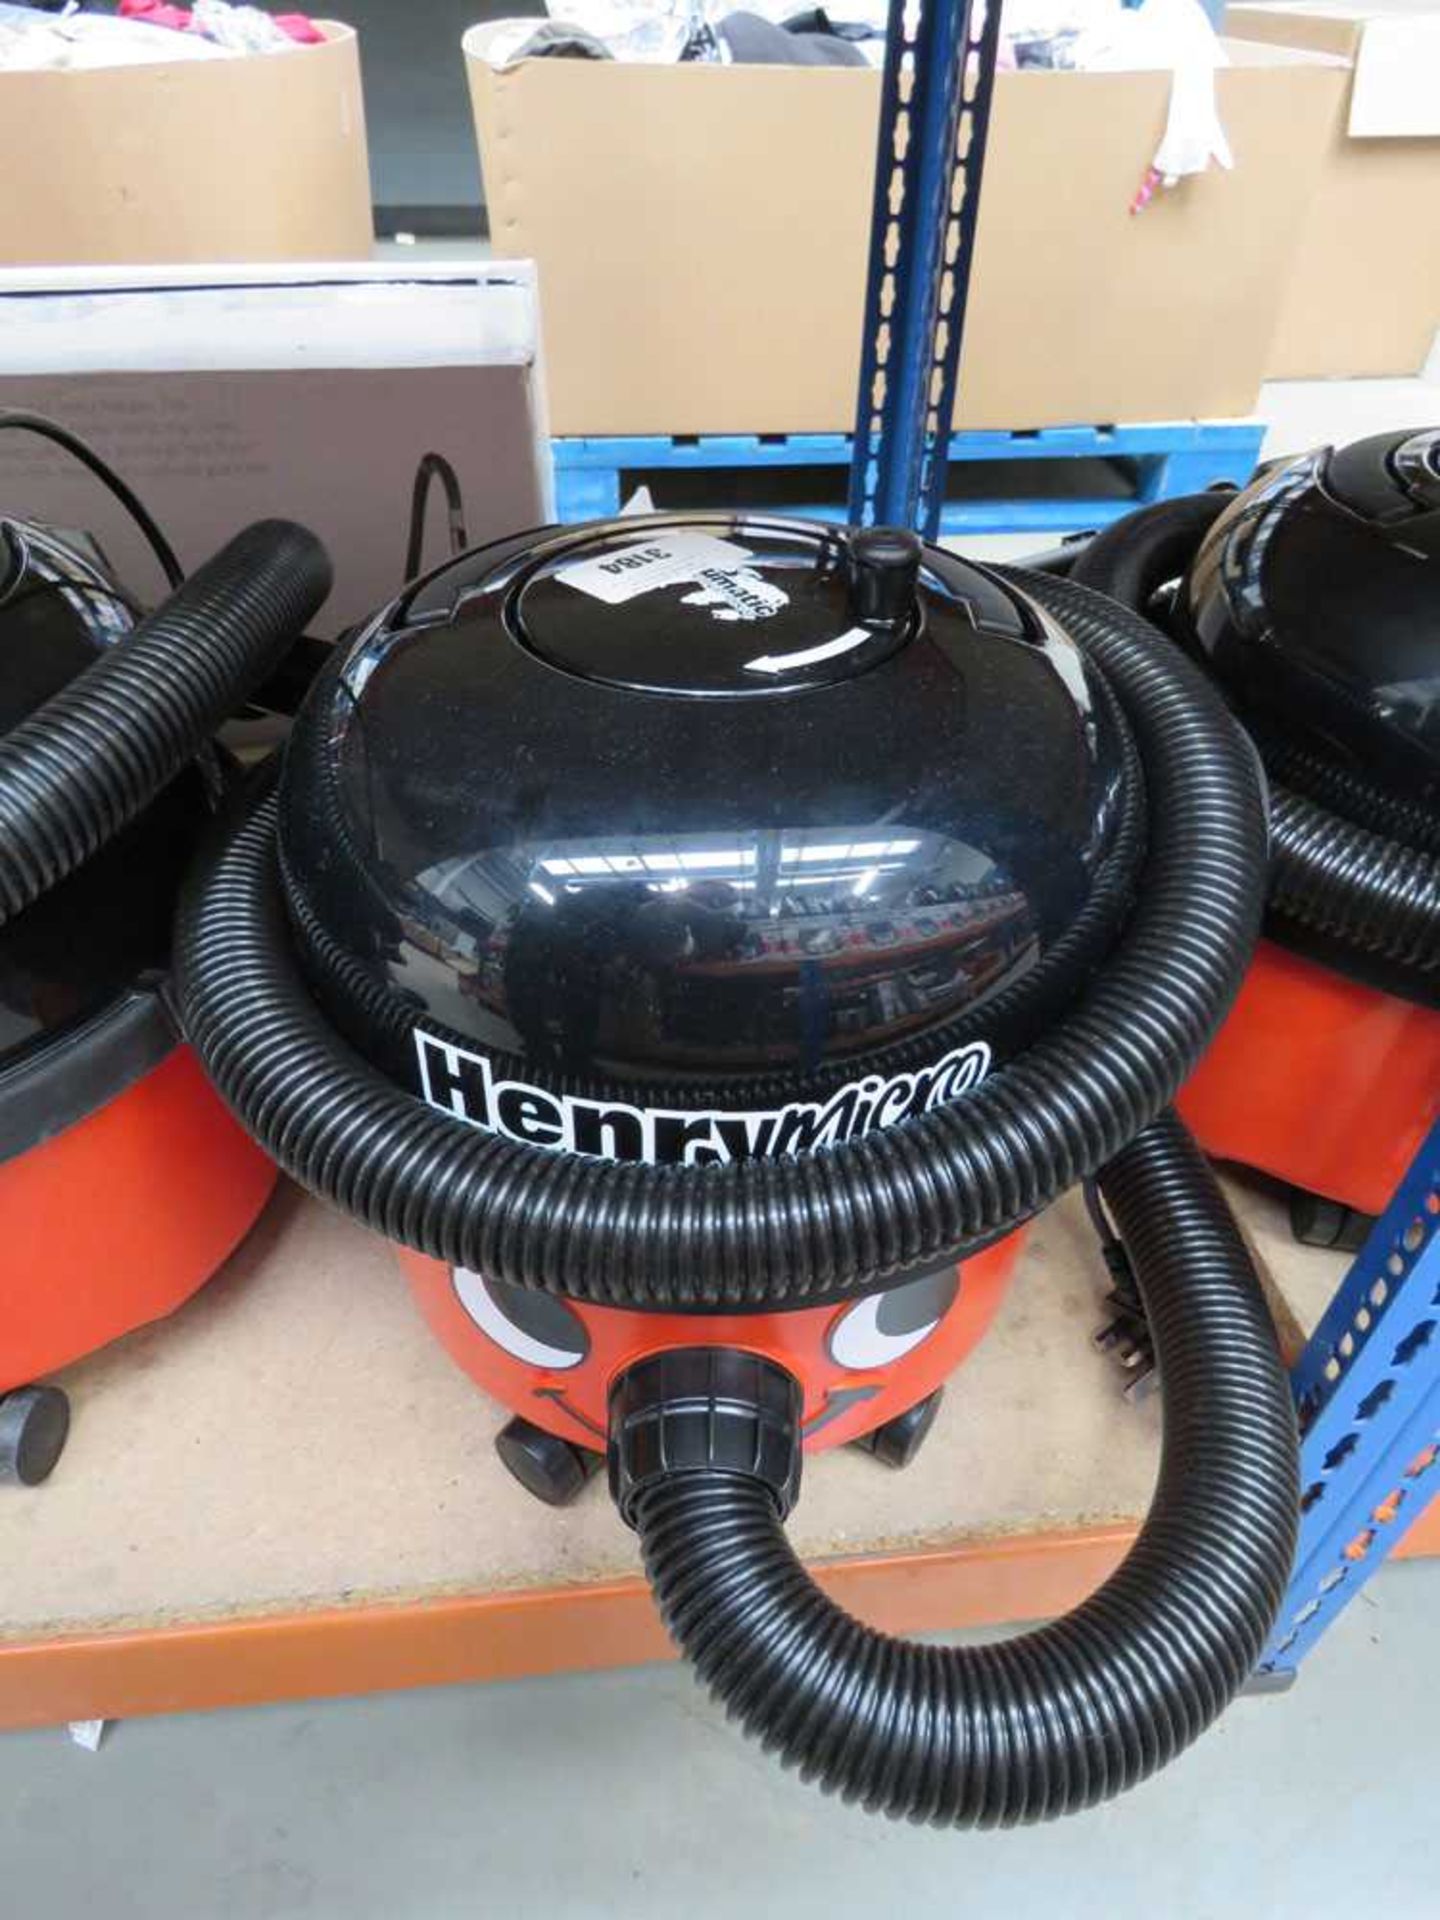 +VAT Henry micro vacuum cleaner with pole